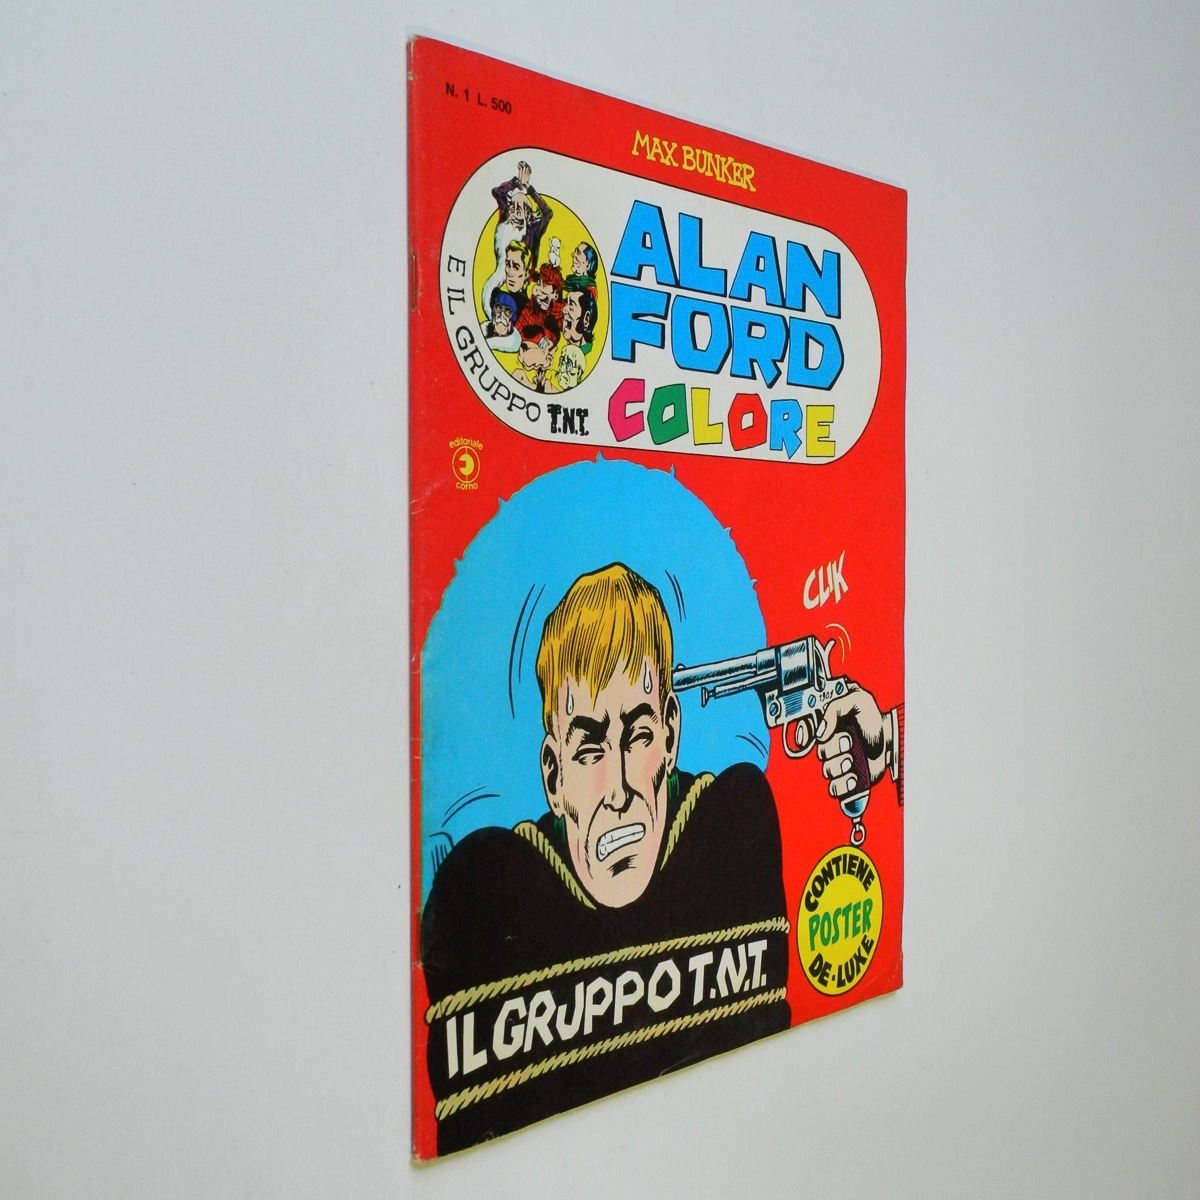 Alan Ford Colore n. 1 con Poster Il Gruppo T.N.T.